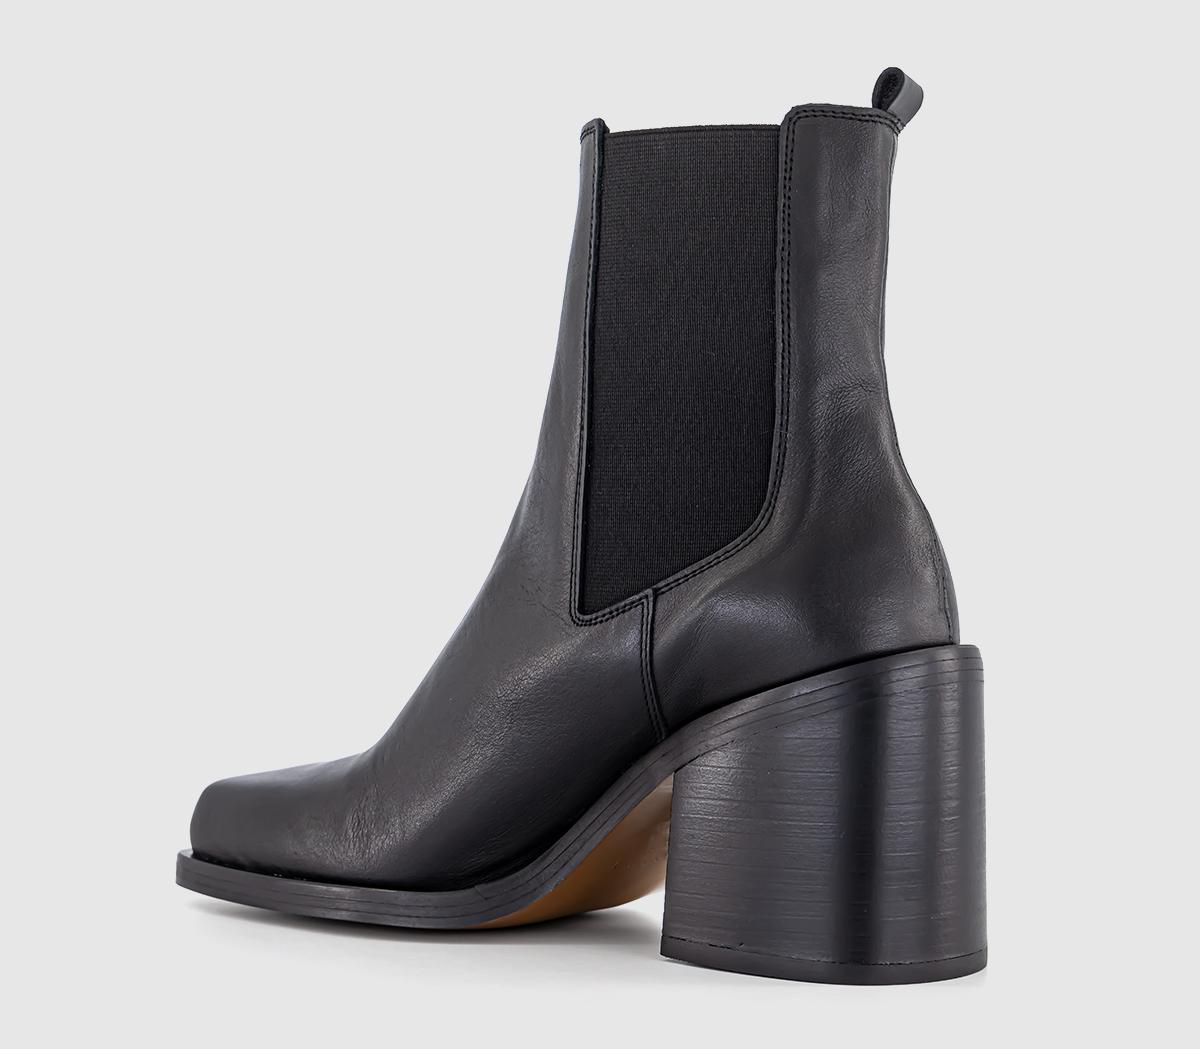 OFFICE Alice Square Toe Heeled Chelsea Boots Black Leather - Women's ...